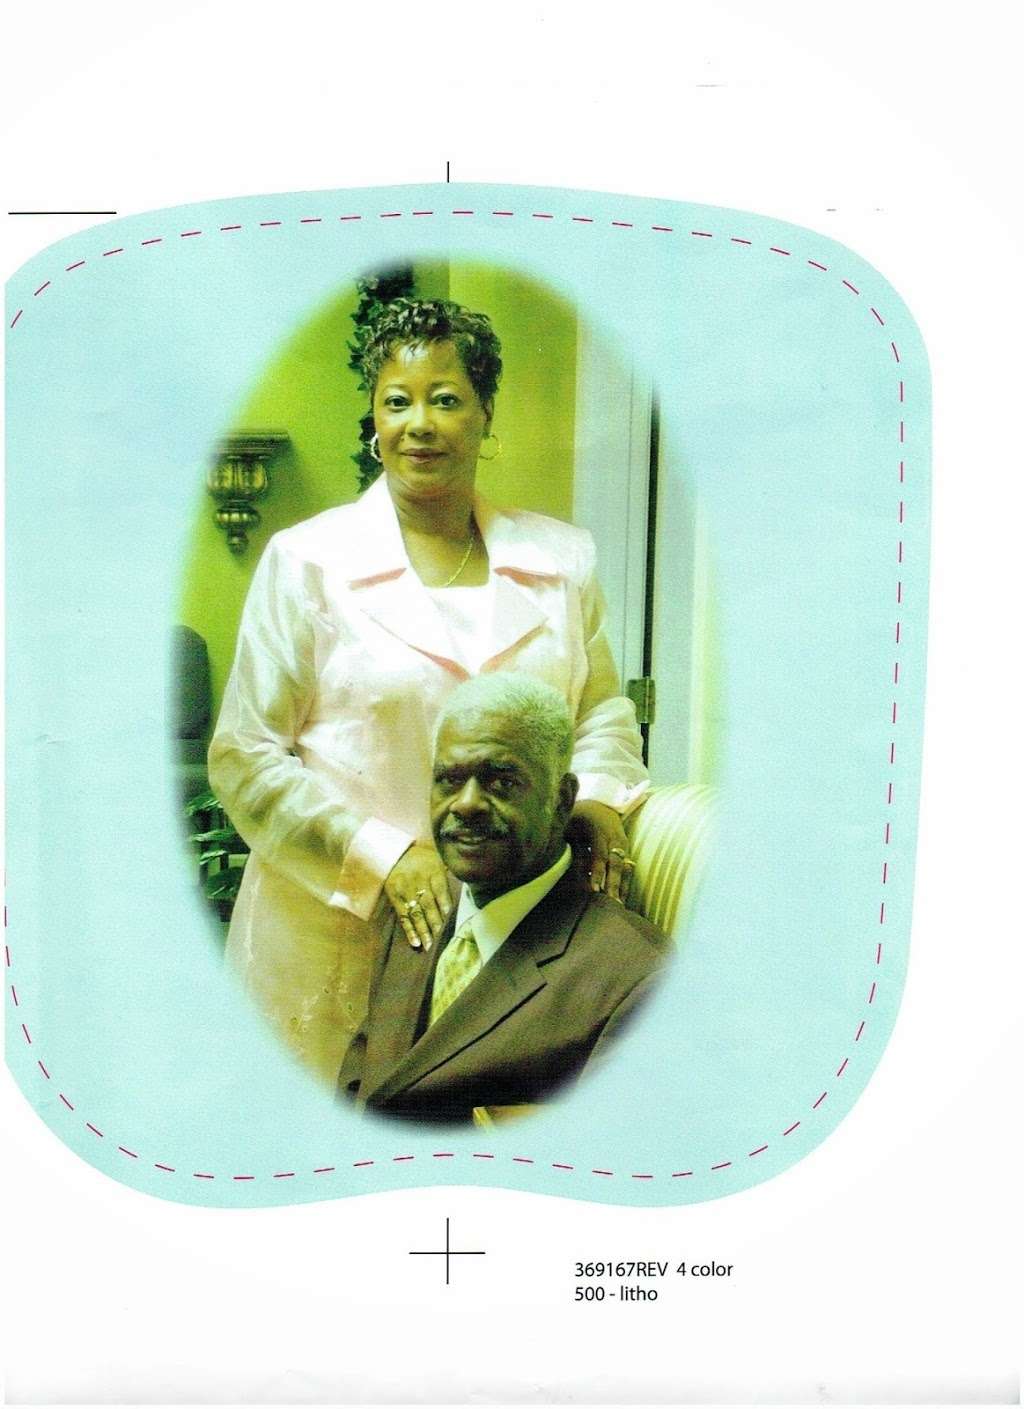 Wayne Russell Funeral Service | 3715 Beatties Ford Rd, Charlotte, NC 28216 | Phone: (704) 910-0656